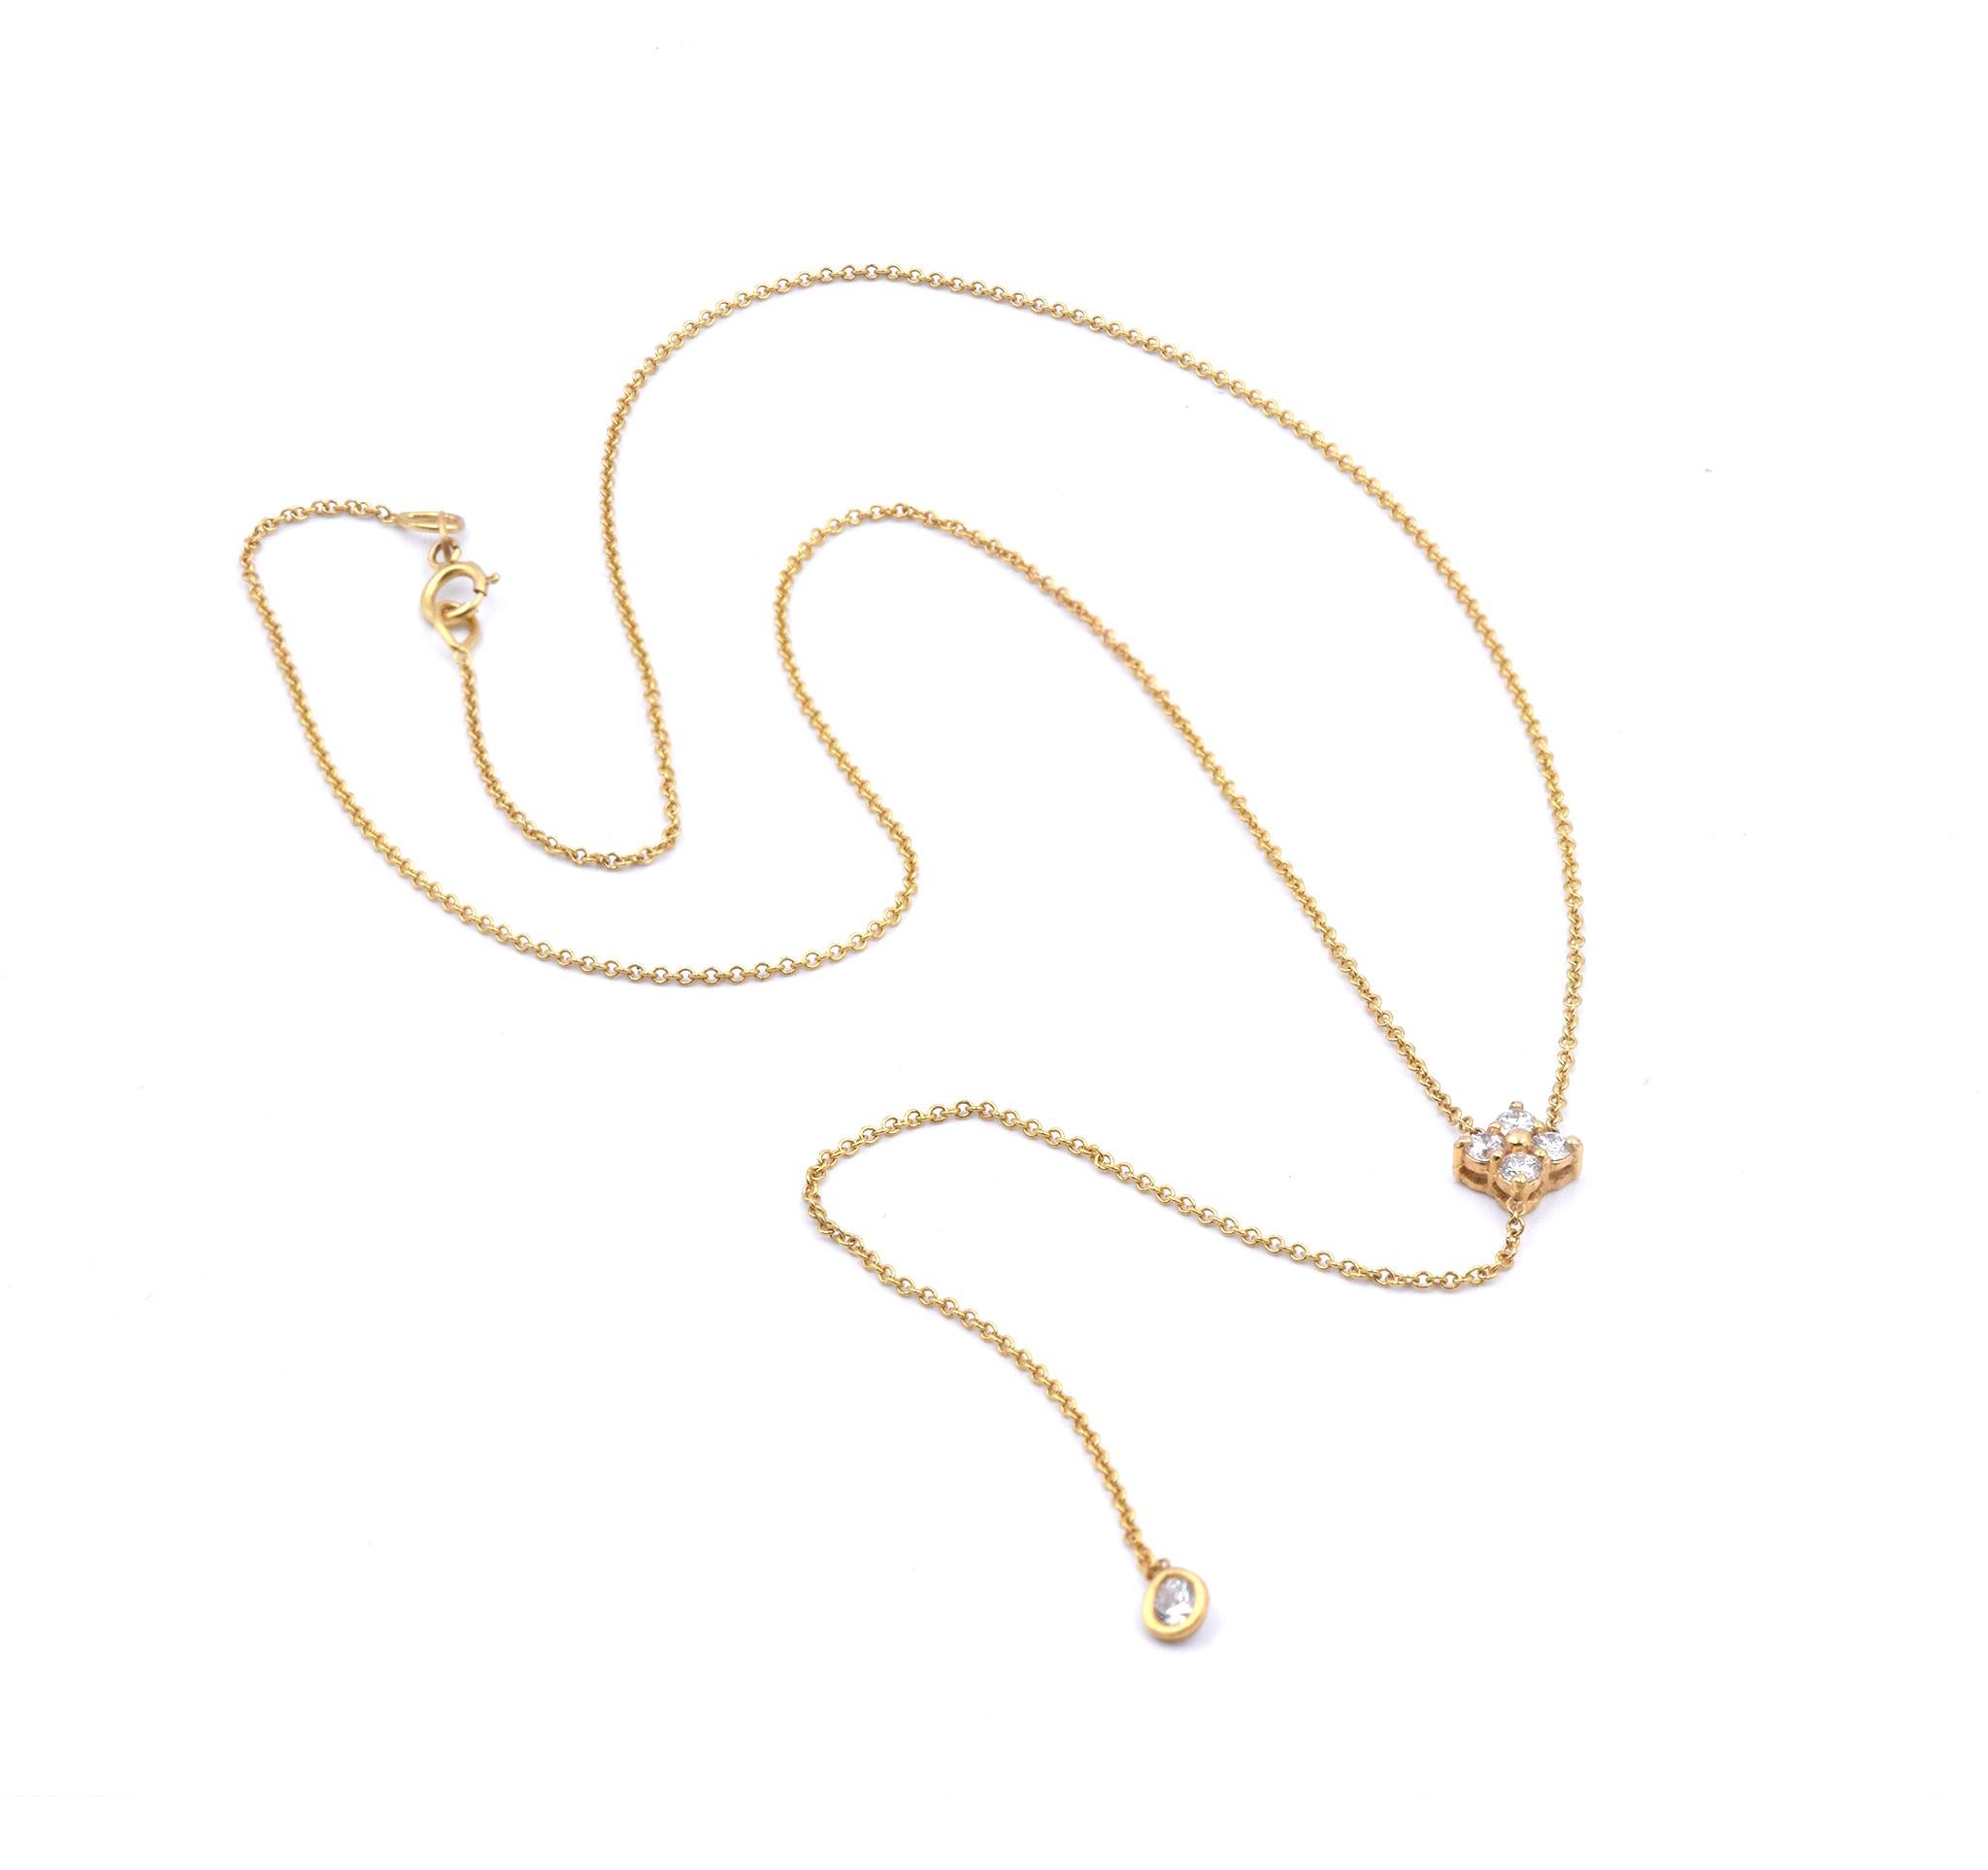 Material: 14k Yellow Gold 
Diamonds: 5 round brilliant cuts = 0.27cttw 
Color: G 
Clarity: VS
Measurement: necklace is 16 inches in length
Weight: 1.79 grams